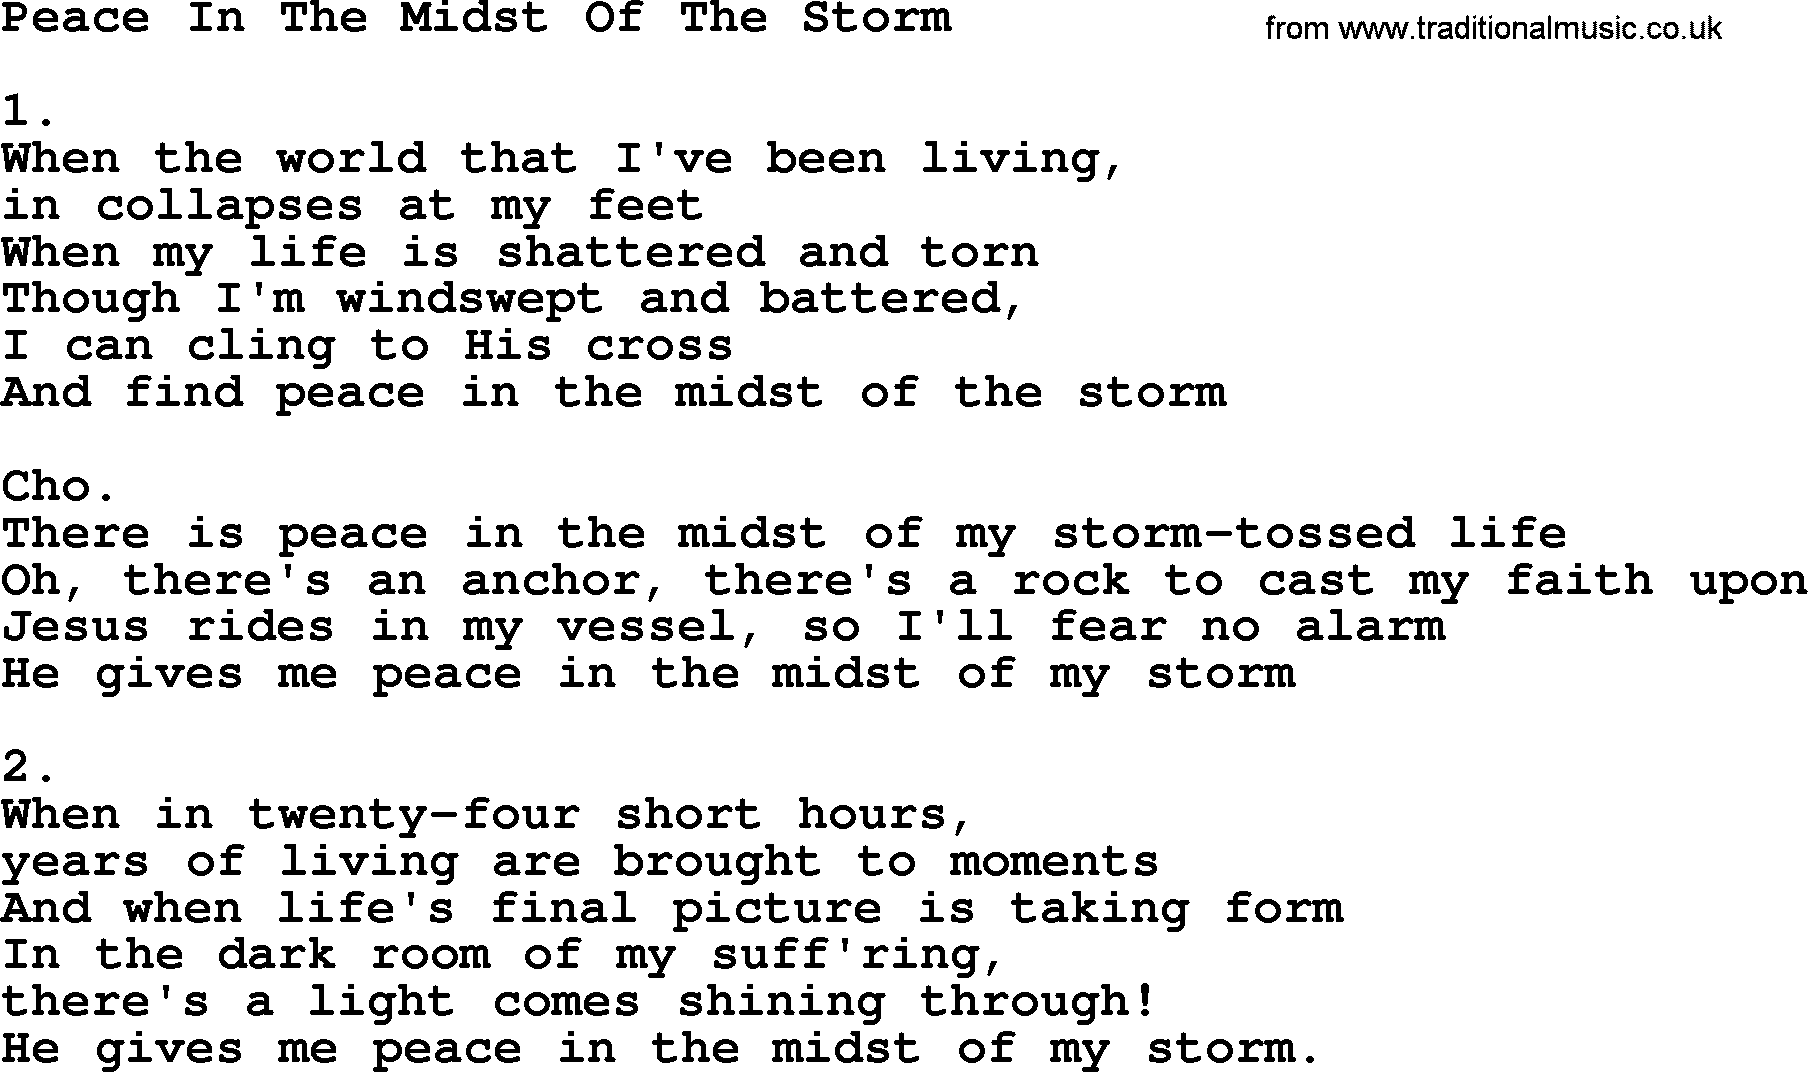 Apostolic & Pentecostal Hymns and Songs, Hymn: Peace In The Midst Of The Storm lyrics and PDF